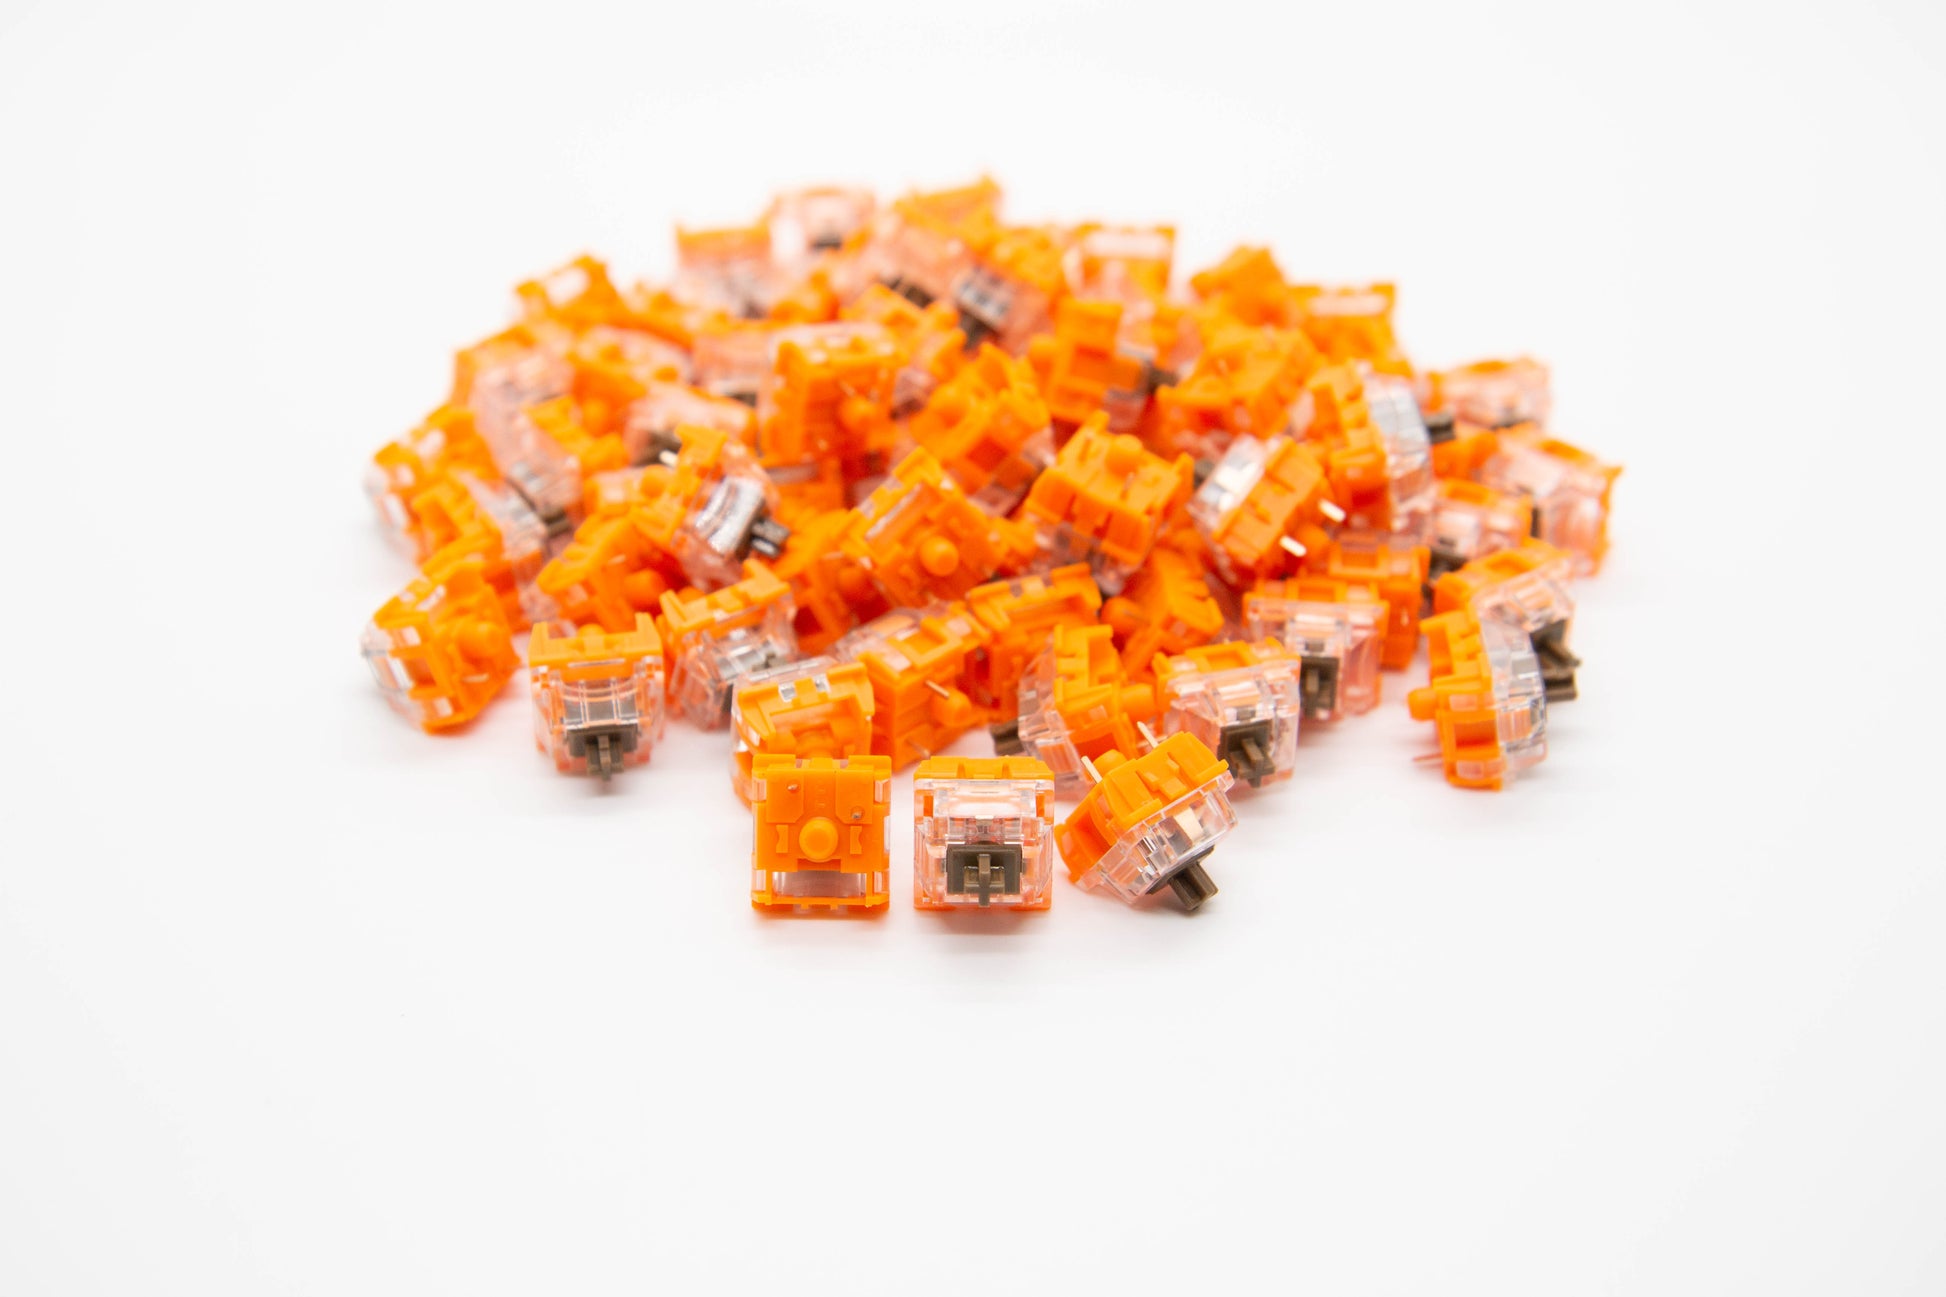 Close-up shot of a pile of TTC Golden Brown mechanical keyboard switches featuring orange and transparent housing and brown stems